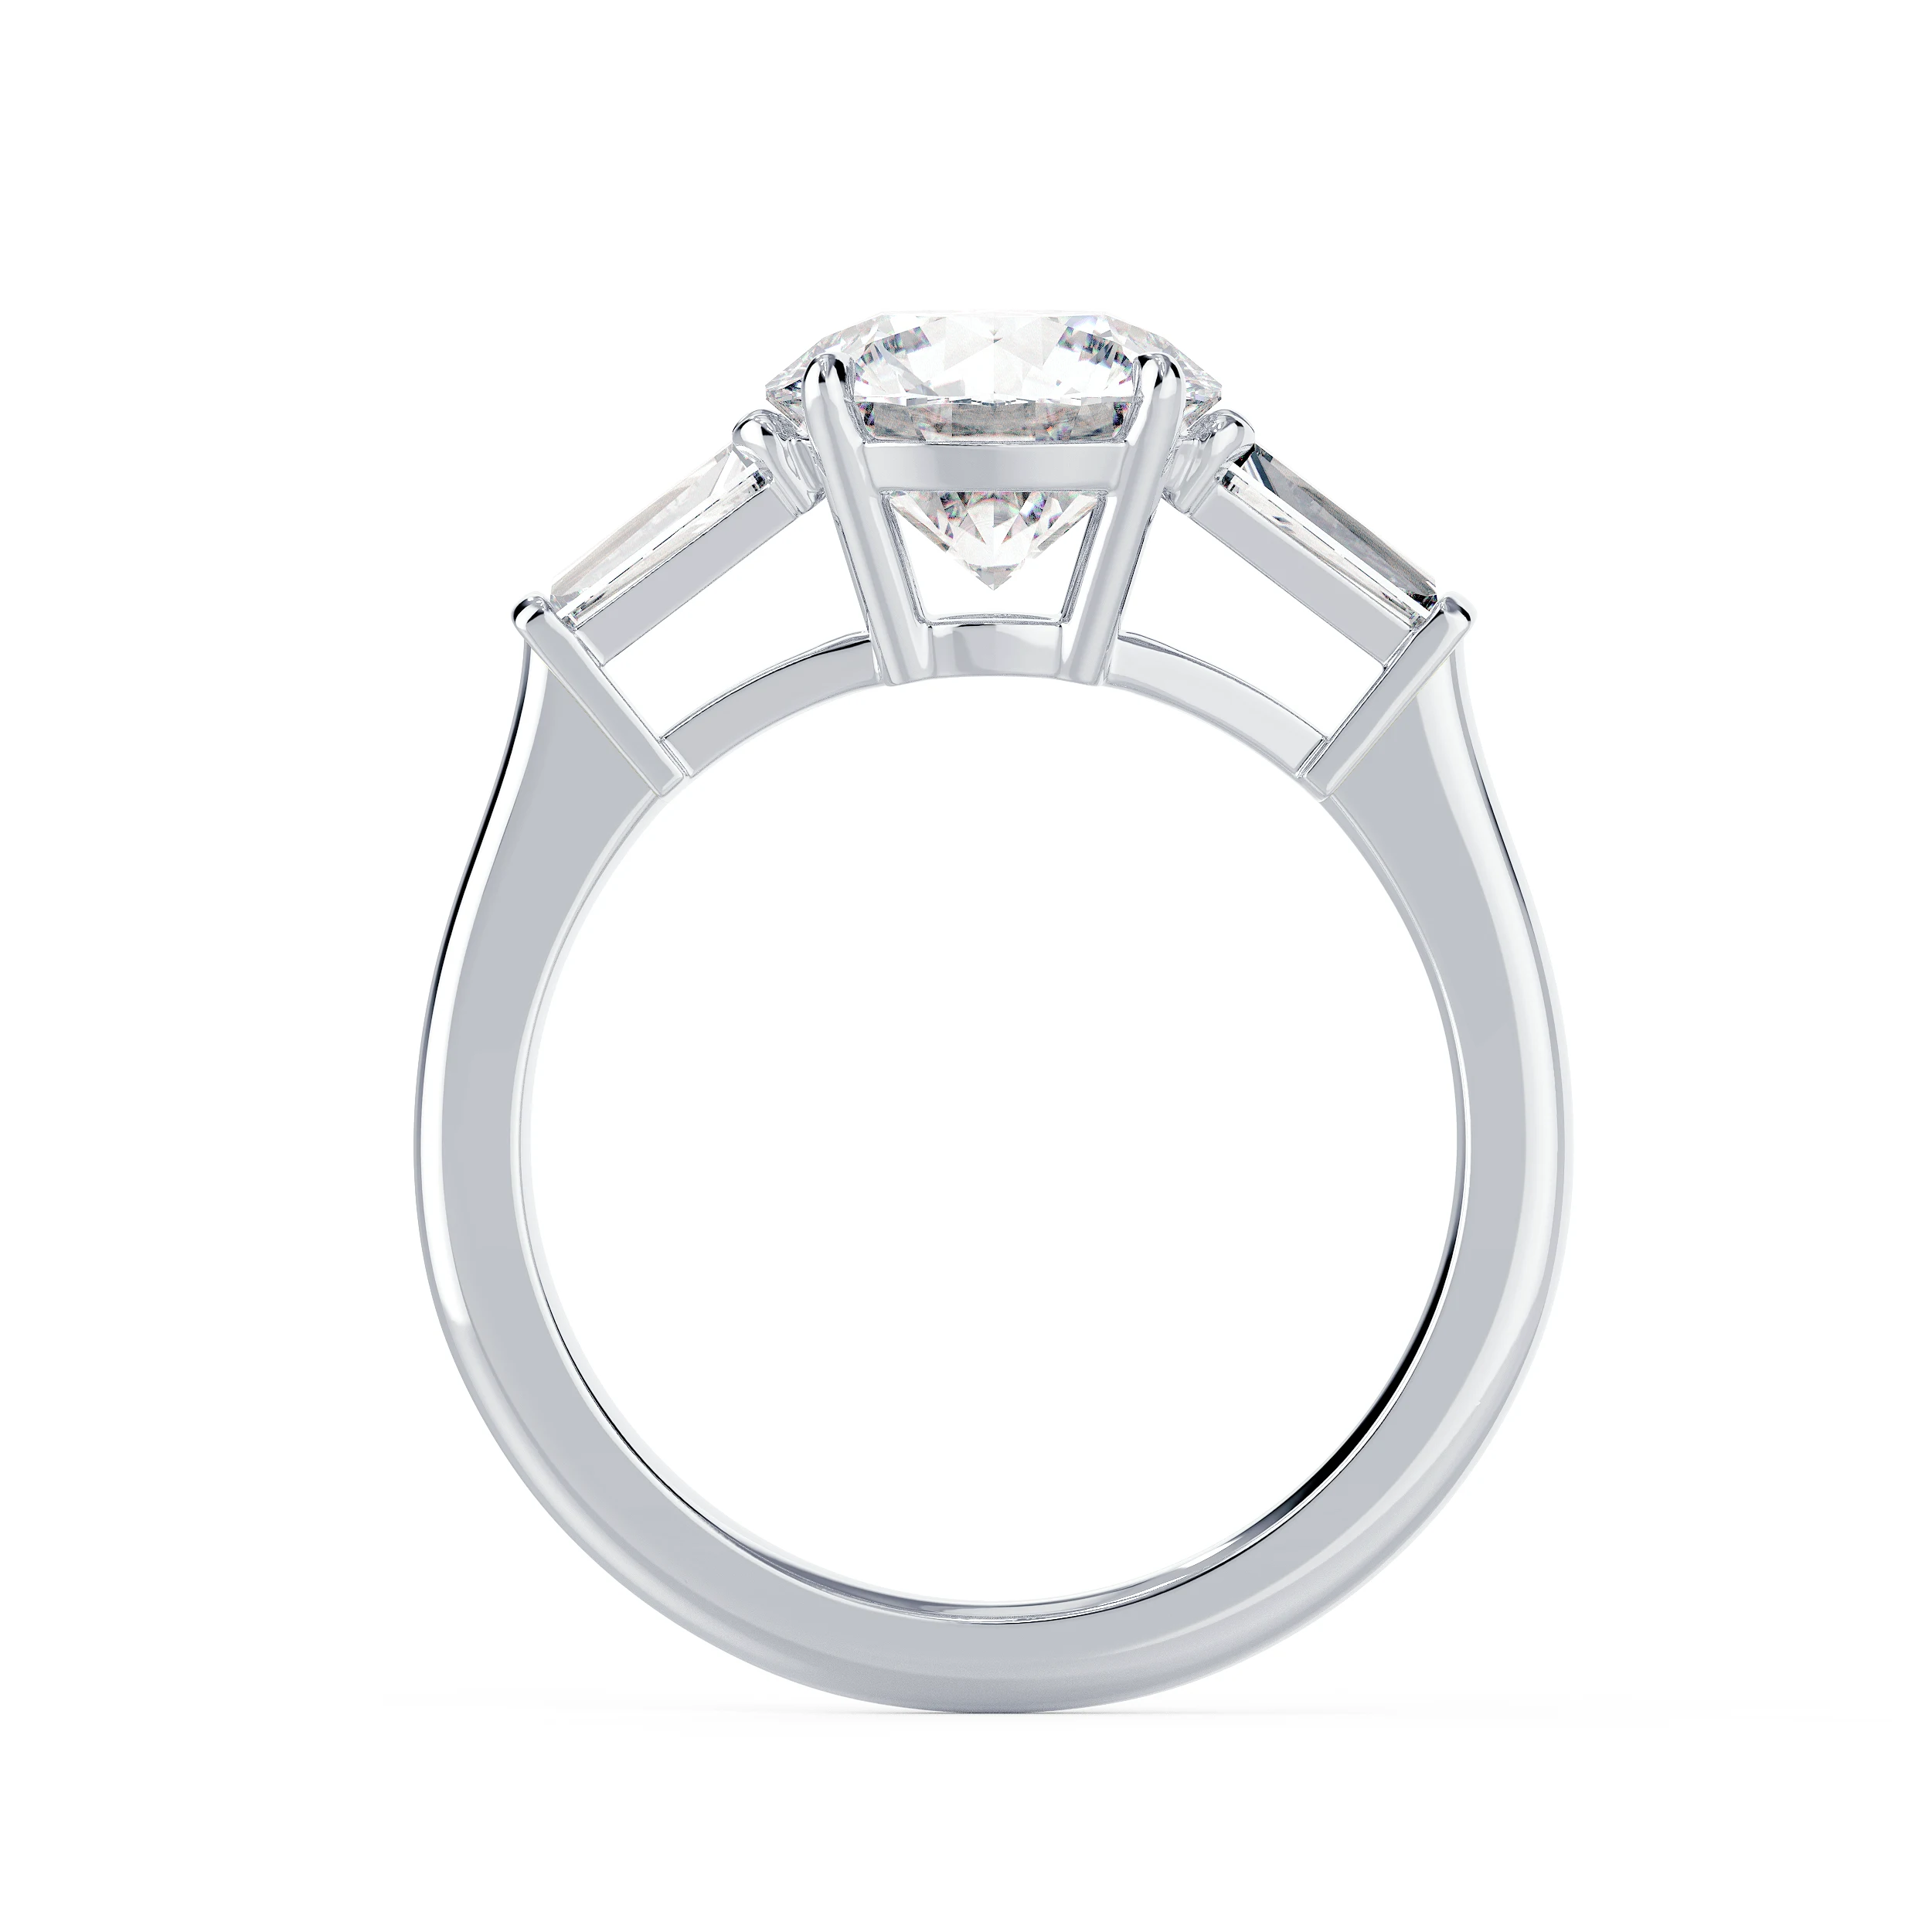 White Gold Round and Baguette Diamond Engagement Ring featuring Diamonds (Profile View)